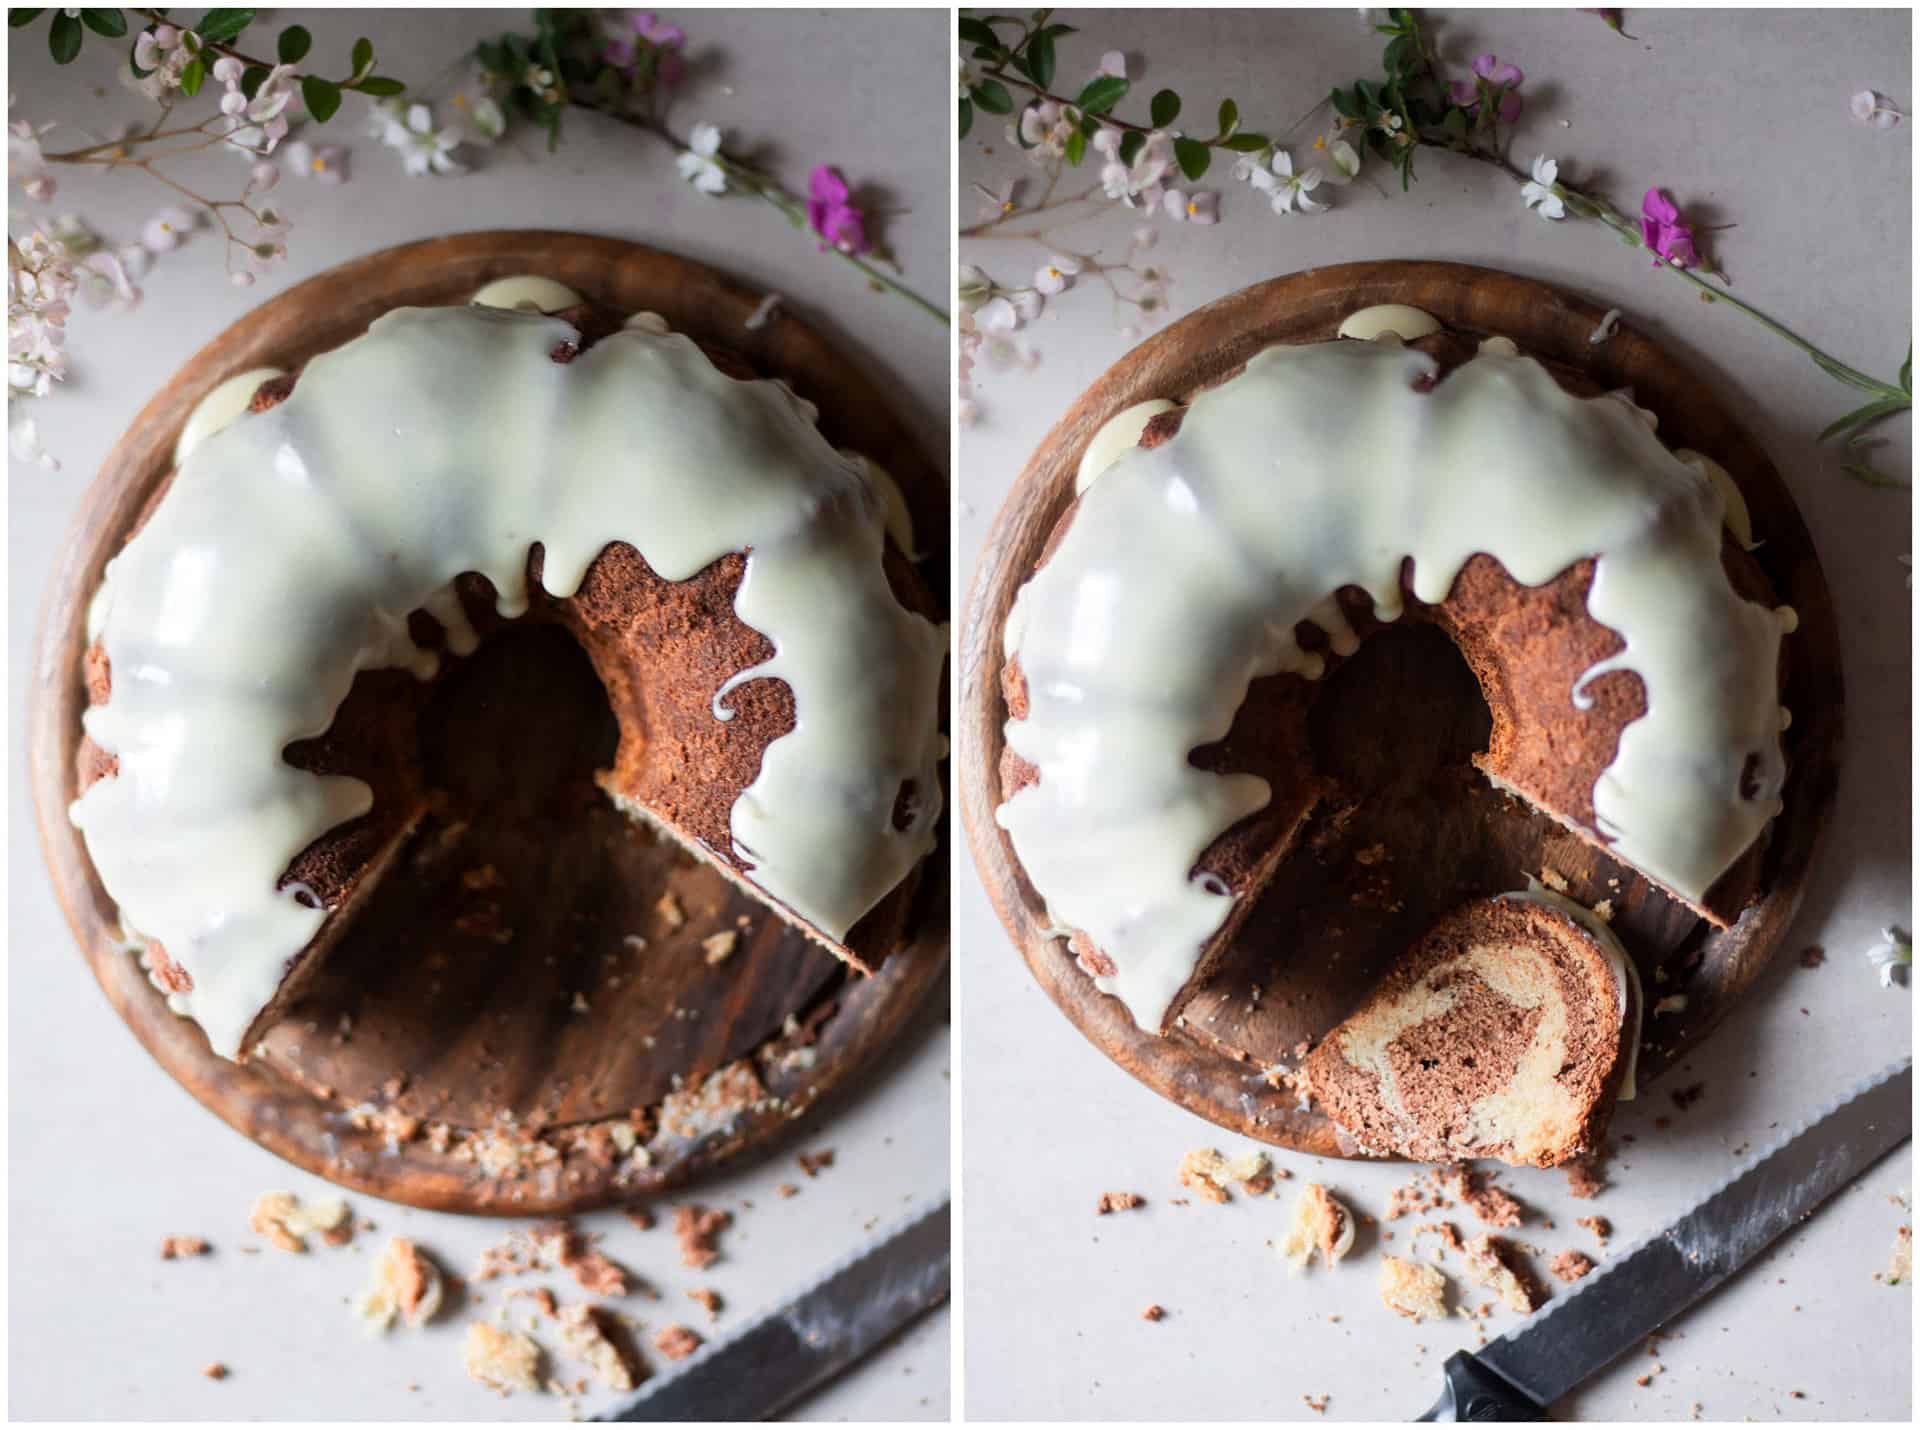 Low FODMAP Gluten-Free Marble Bundt Cake. This cake is flavorful, moist and perfectly sweetened. Every bite melts in the mouth.